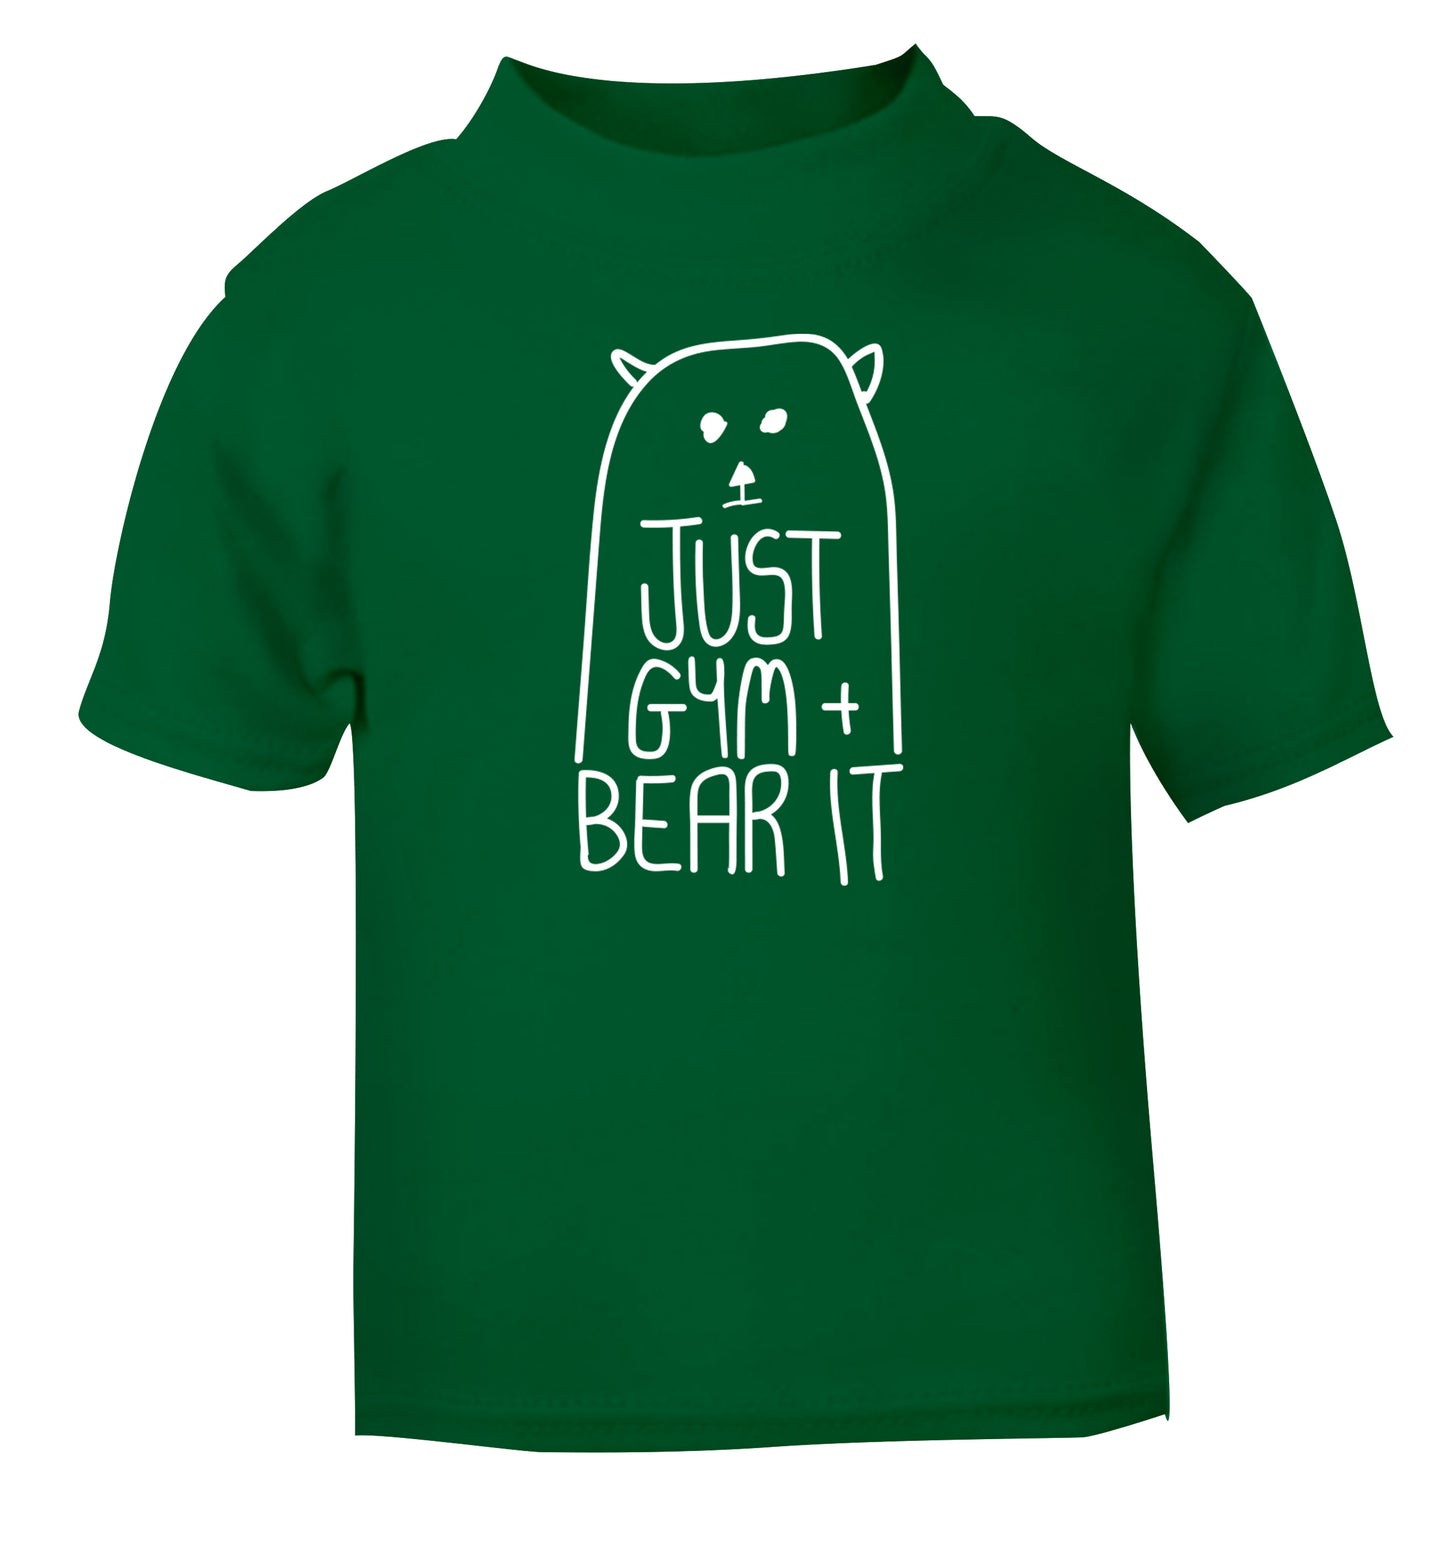 Just gym and bear it green Baby Toddler Tshirt 2 Years